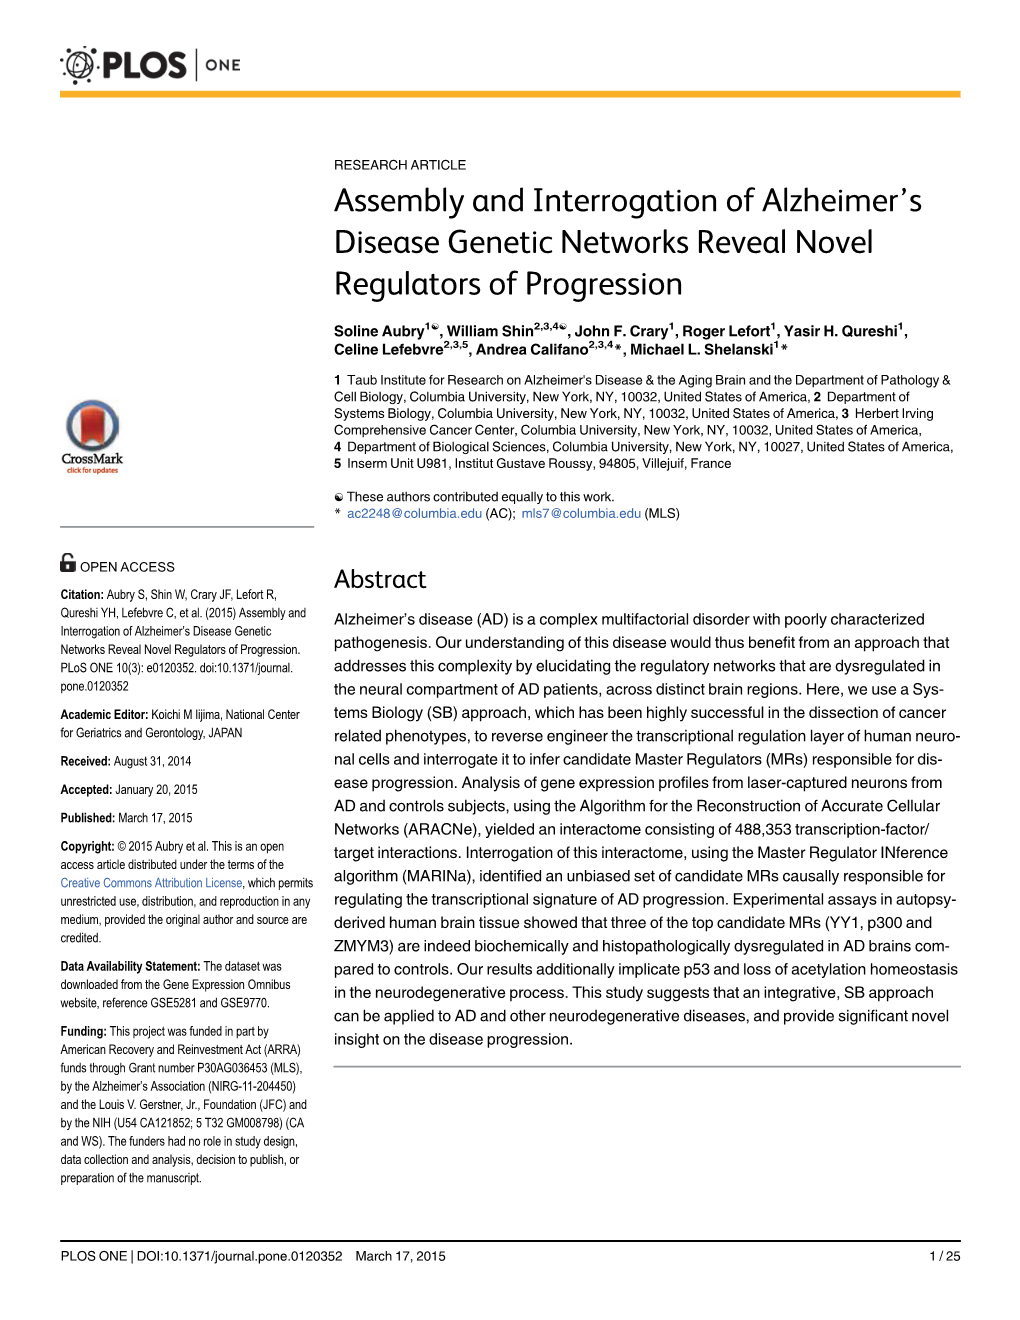 Assembly and Interrogation of Alzheimer's Disease Genetic